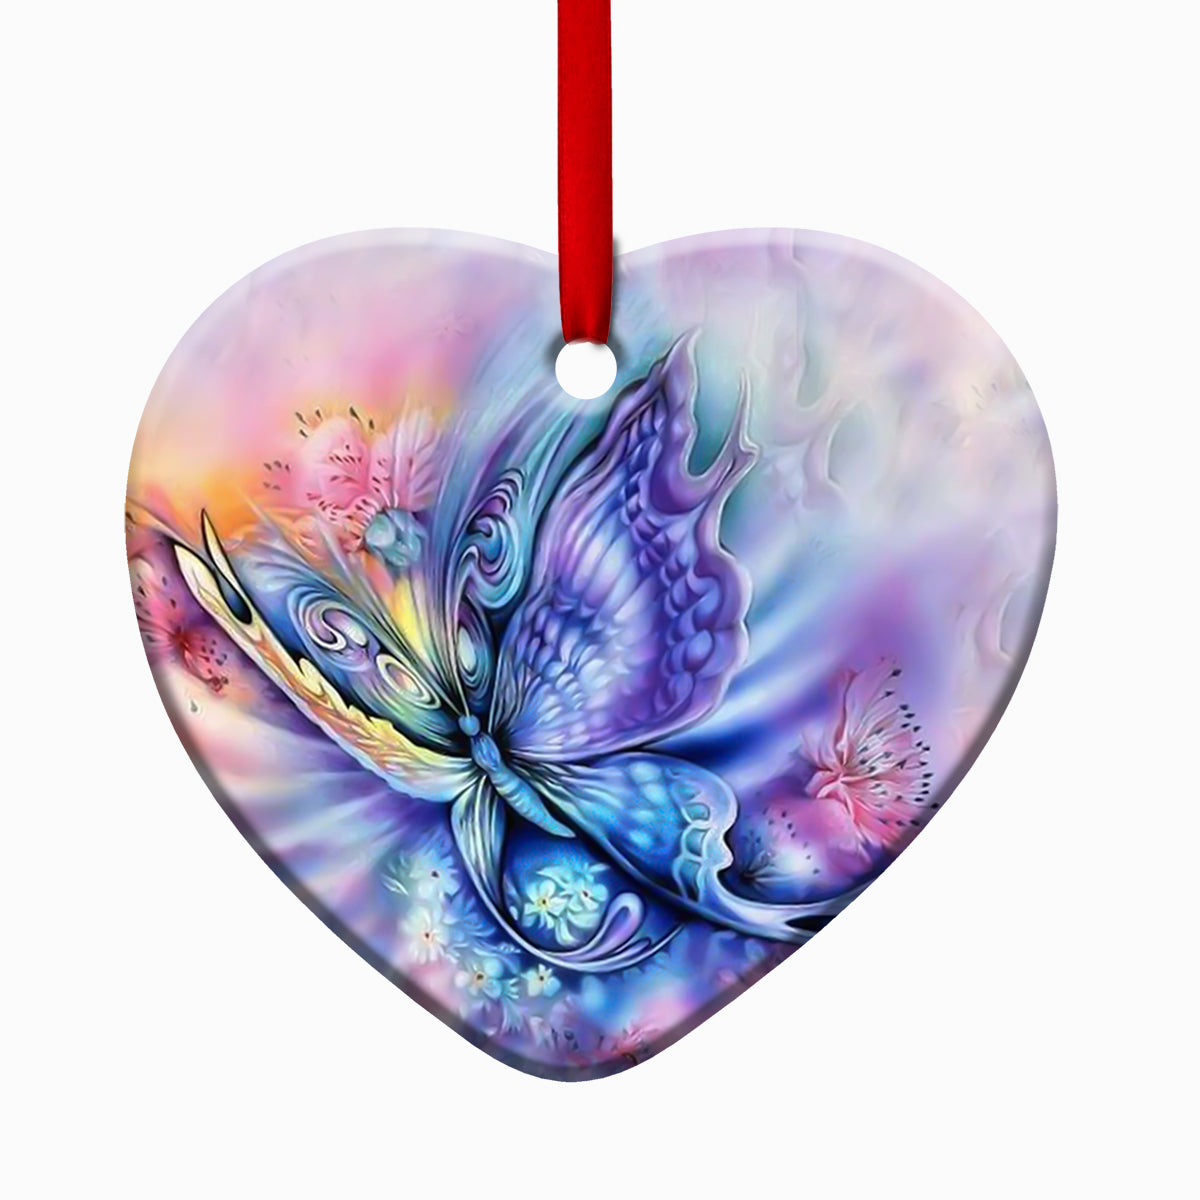 Butterfly Color Art Heart Ceramic Ornament - Christmas Ornament - Christmas Gift